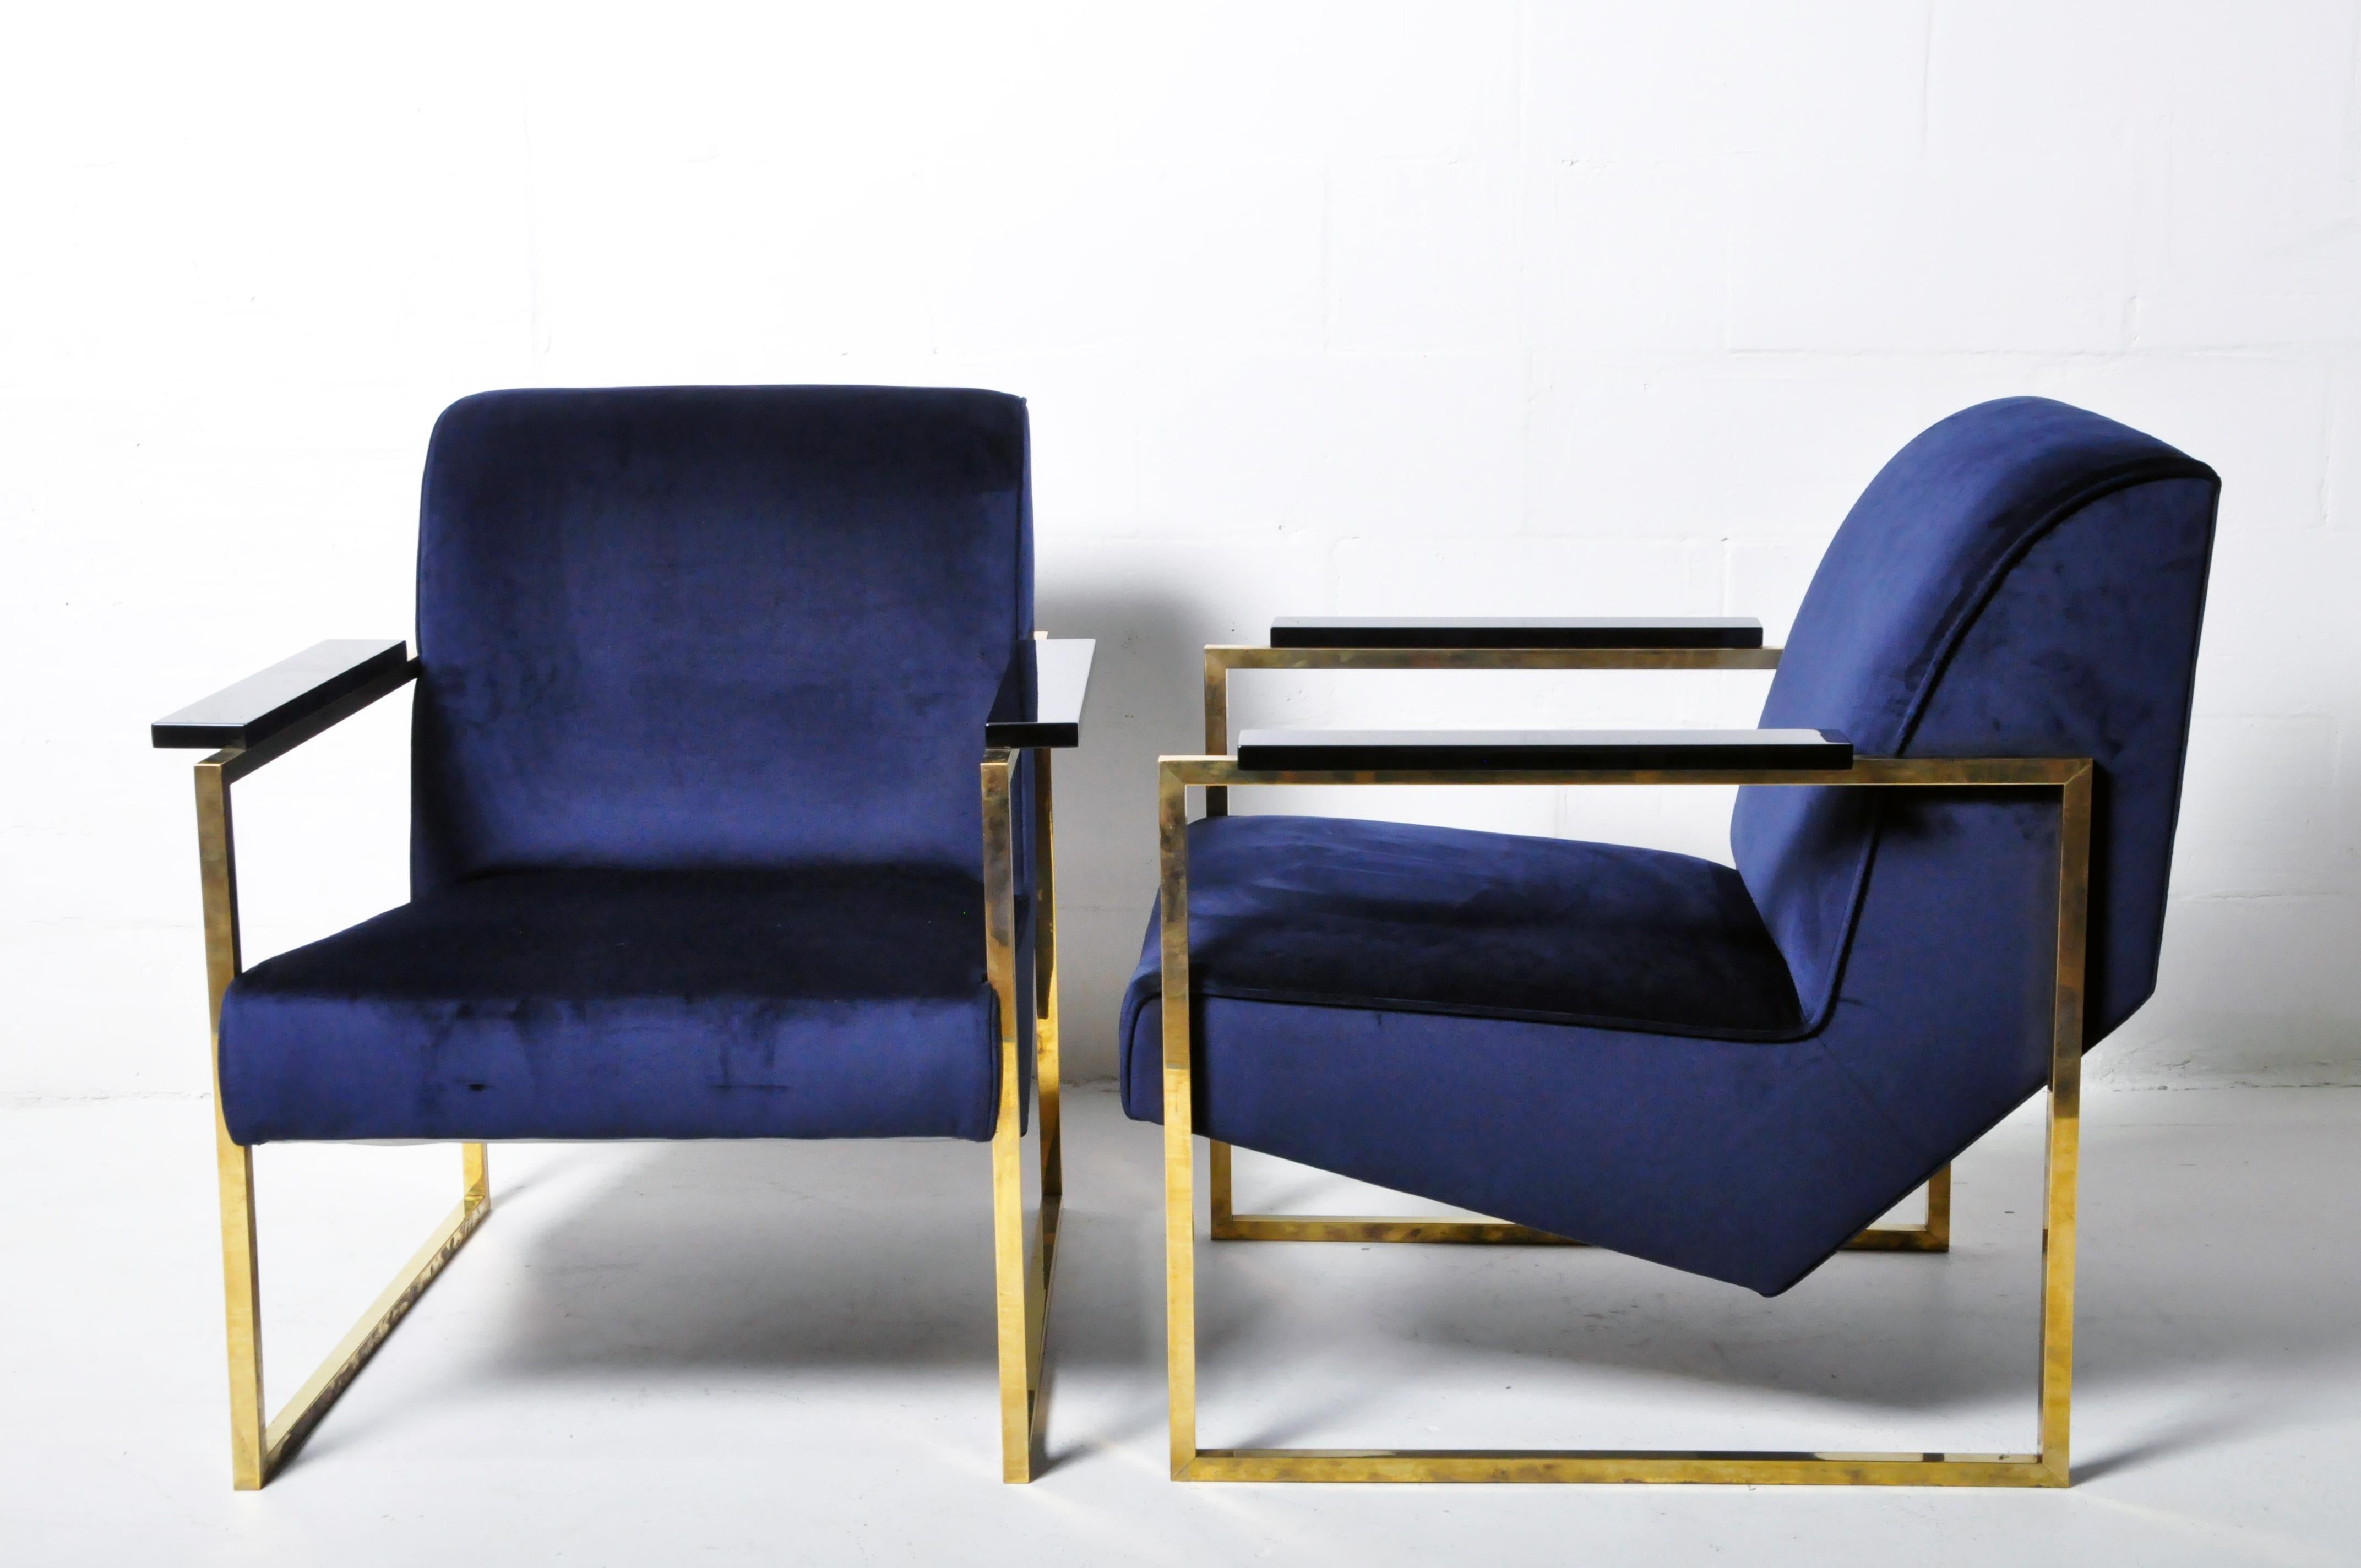 European Pair of Brutalist Lounge Chairs with Brass Arms